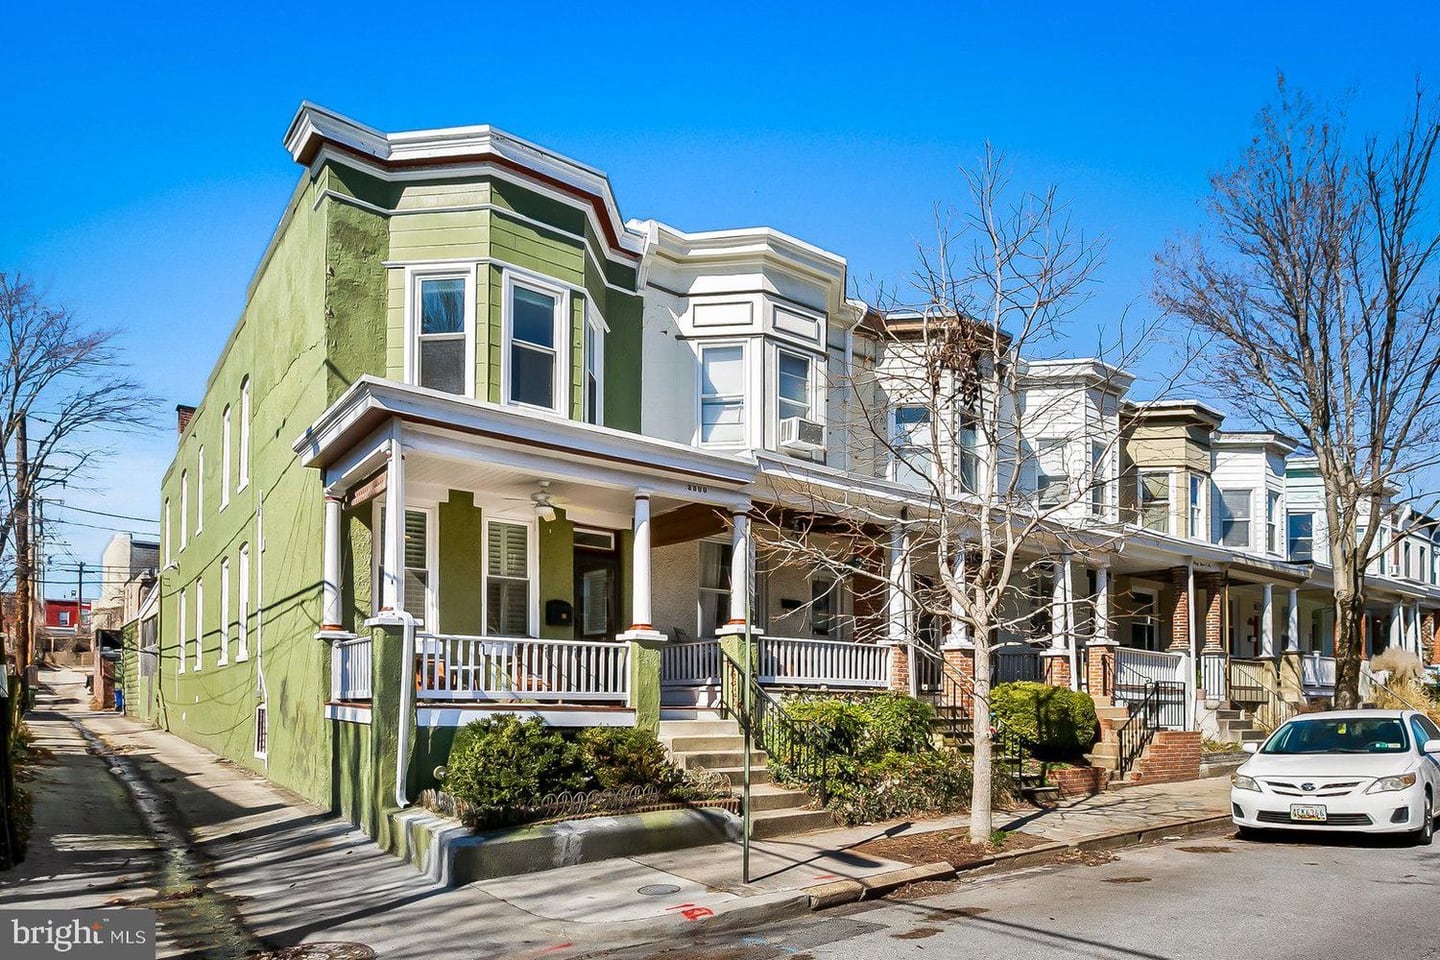 For sale: What you can get for $415K-$465K in Baltimore